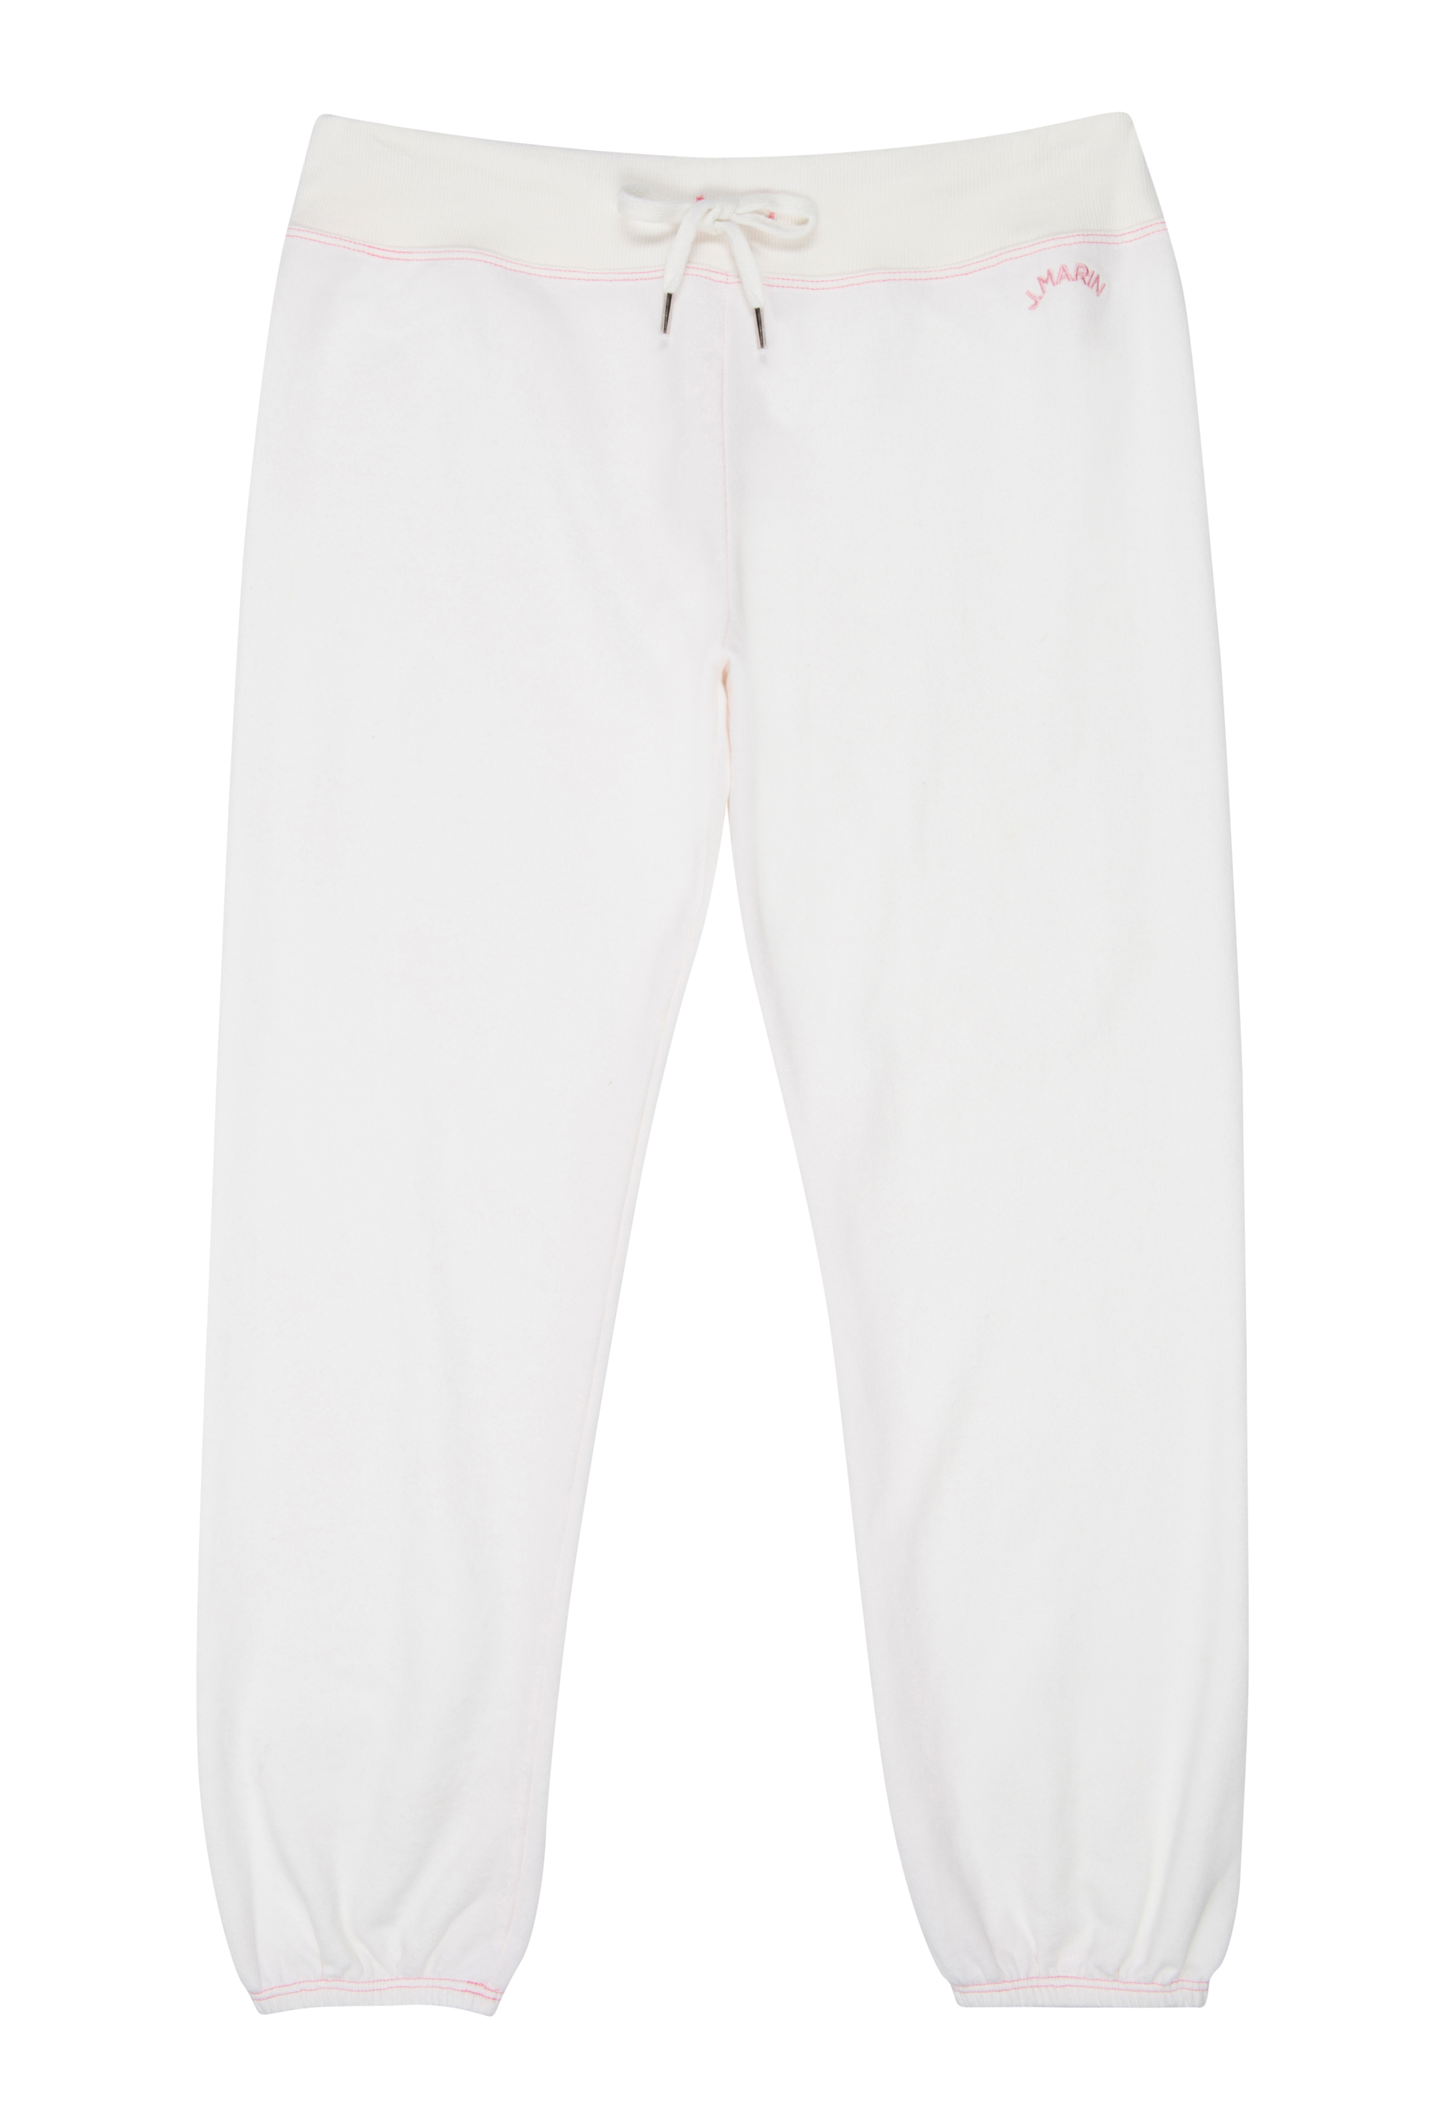 Retro Classic Cropped Organic Terry Gym Sweatpants - Natural - J. Marin